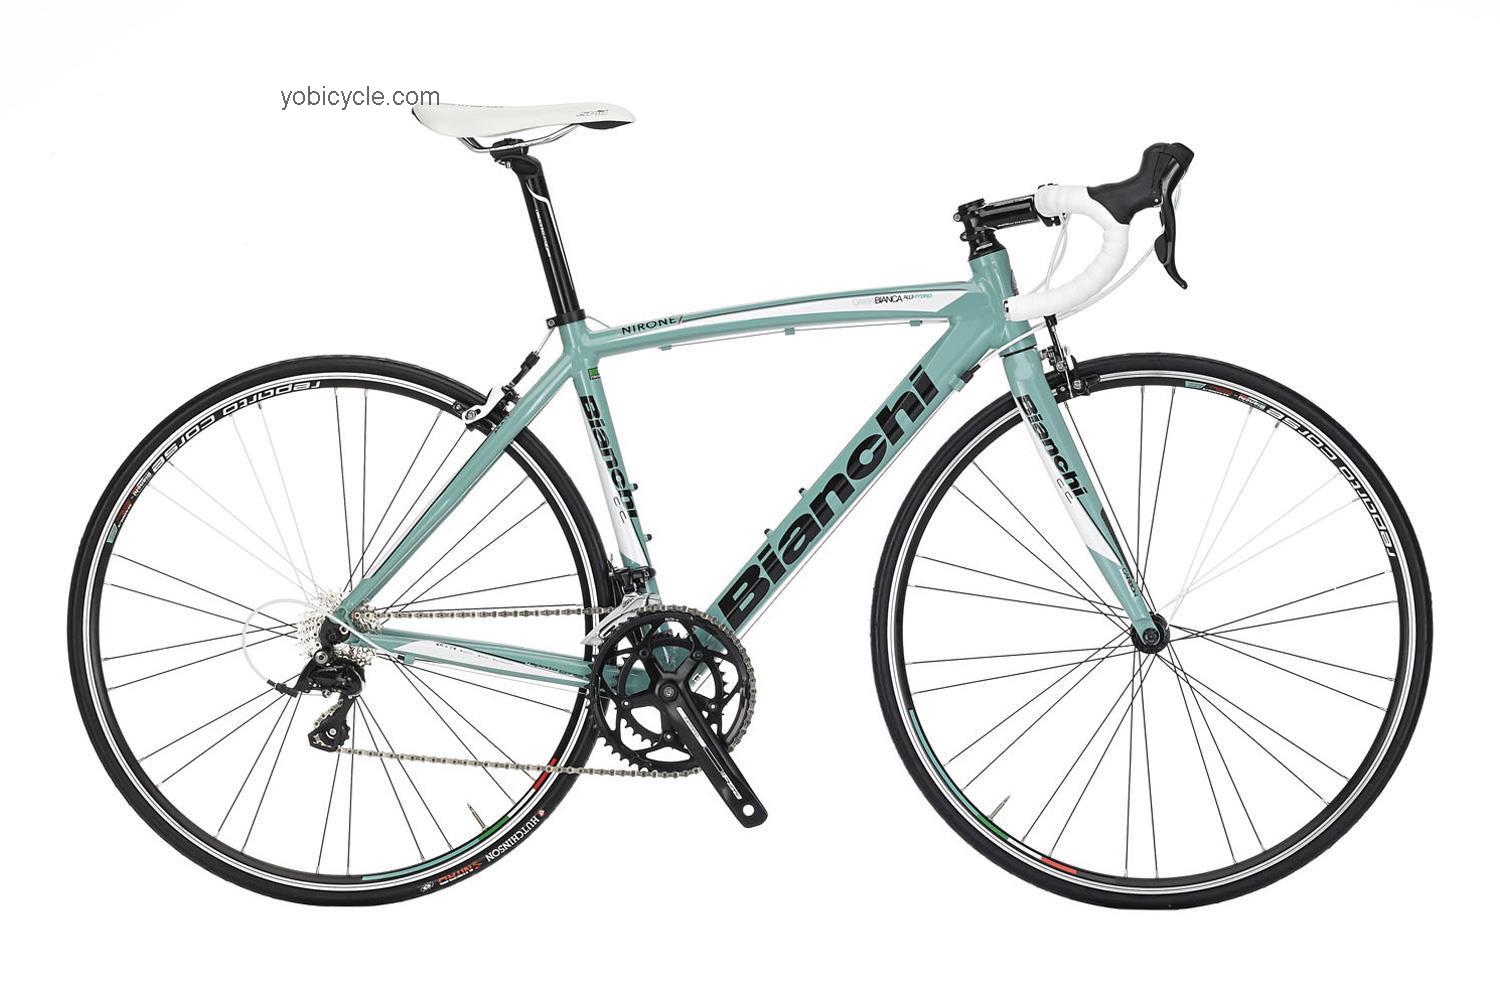 Bianchi  Via Nirone Dama Sora Technical data and specifications